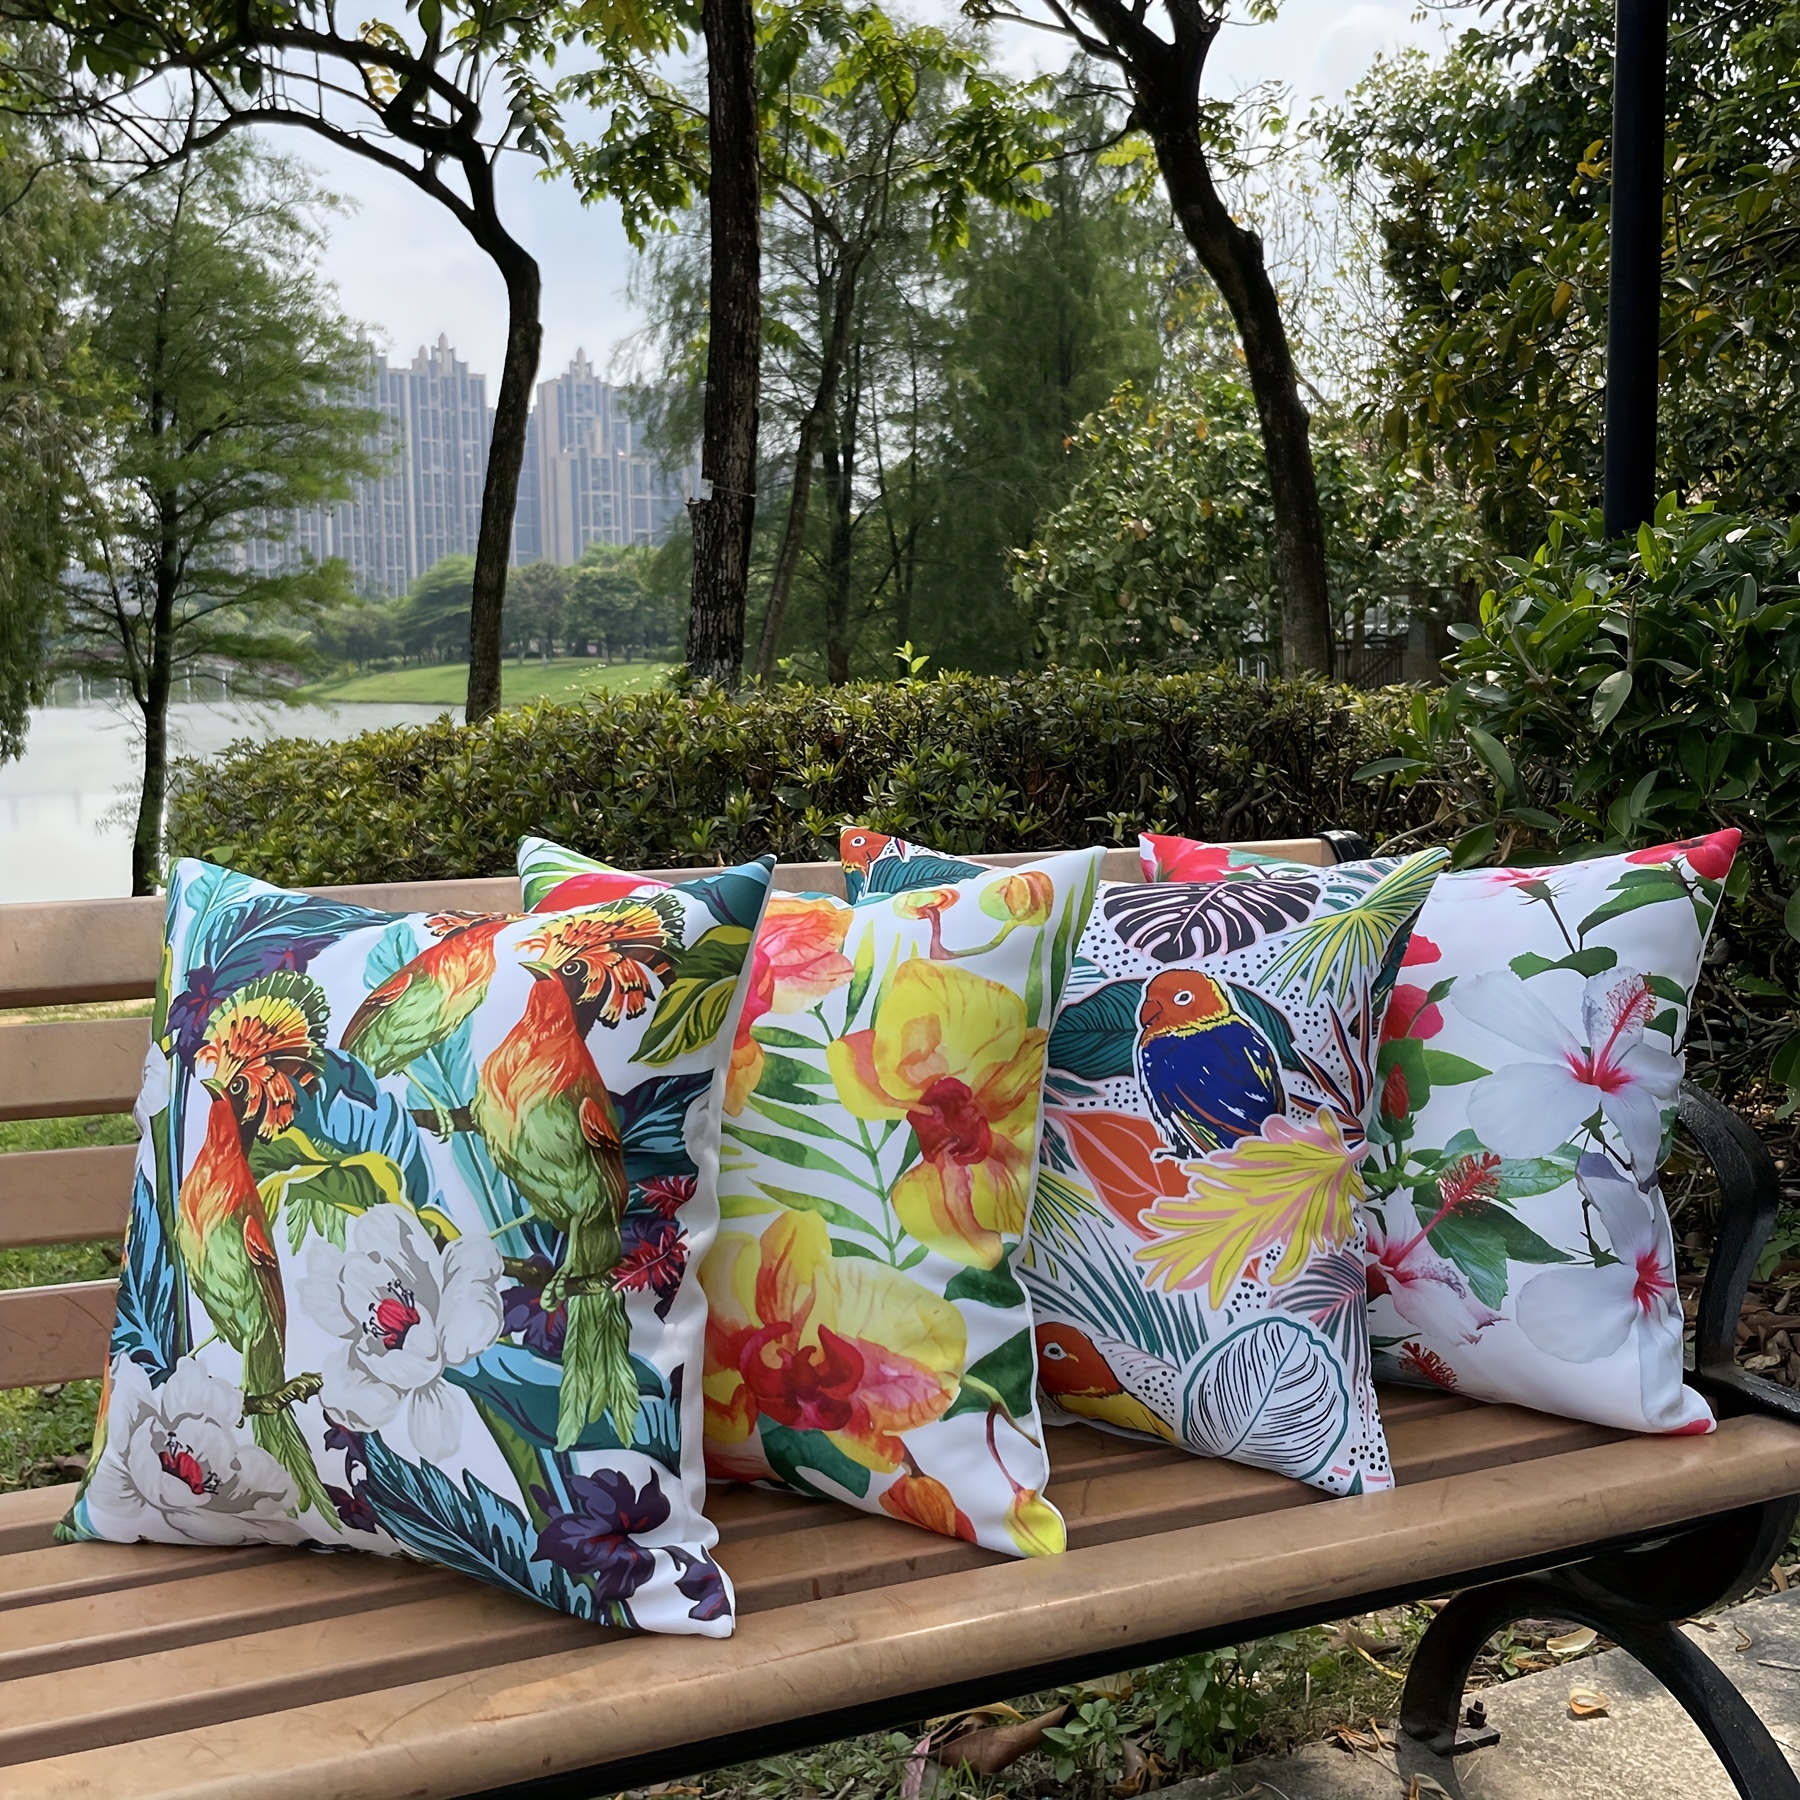 

4pcs Tropical Bird Pillow Covers - Waterproof Toucan Leaves And Flowers Cushion Cover For Men/women - Decorative Polyester Square Pillow Case - 18x18 Inch